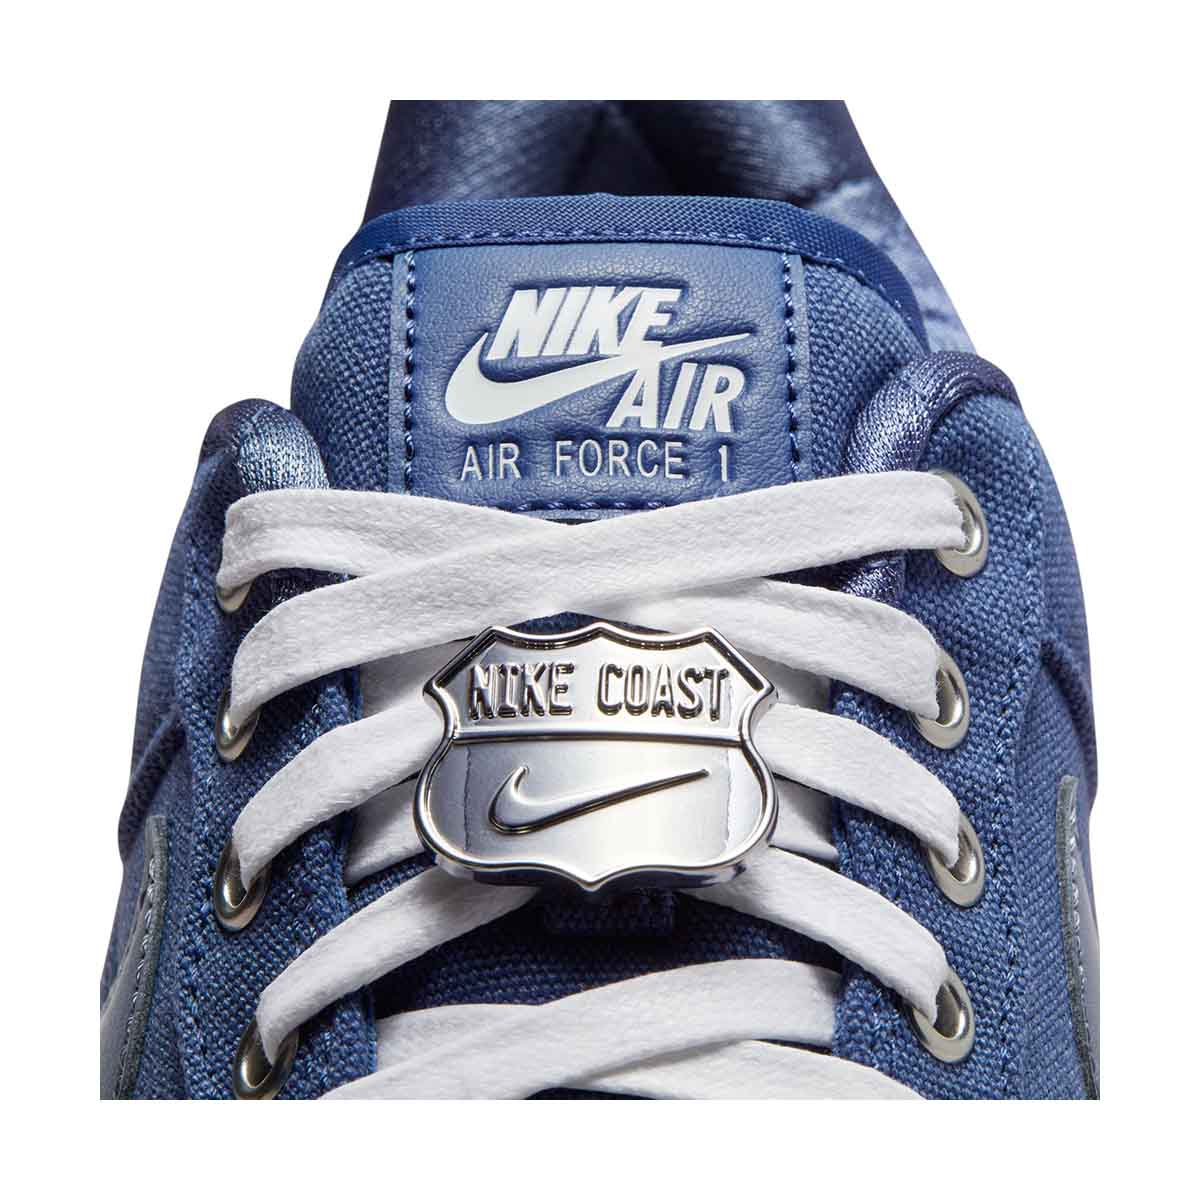 Nike Air Force 1 Premium #Nikeairforce  Nike air shoes, Air force one shoes,  Sneakers men fashion